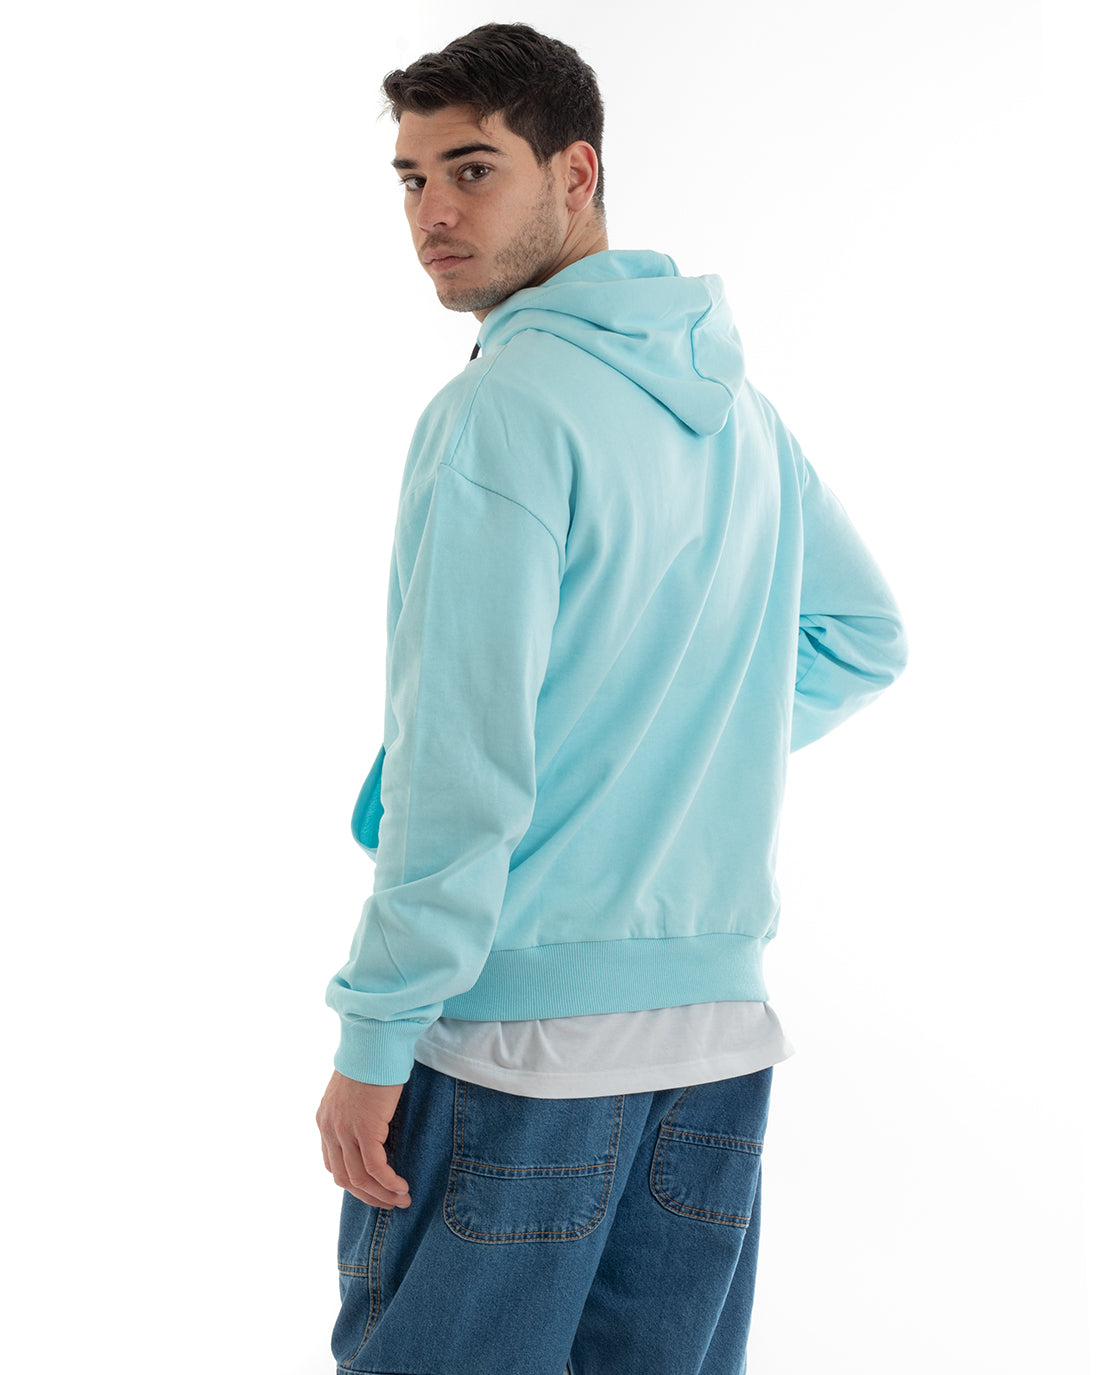 Men's Basic Hoodie Sweatshirt Solid Color Light Blue Comfortable Relaxed Fit Cotton GIOSAL-F2978A